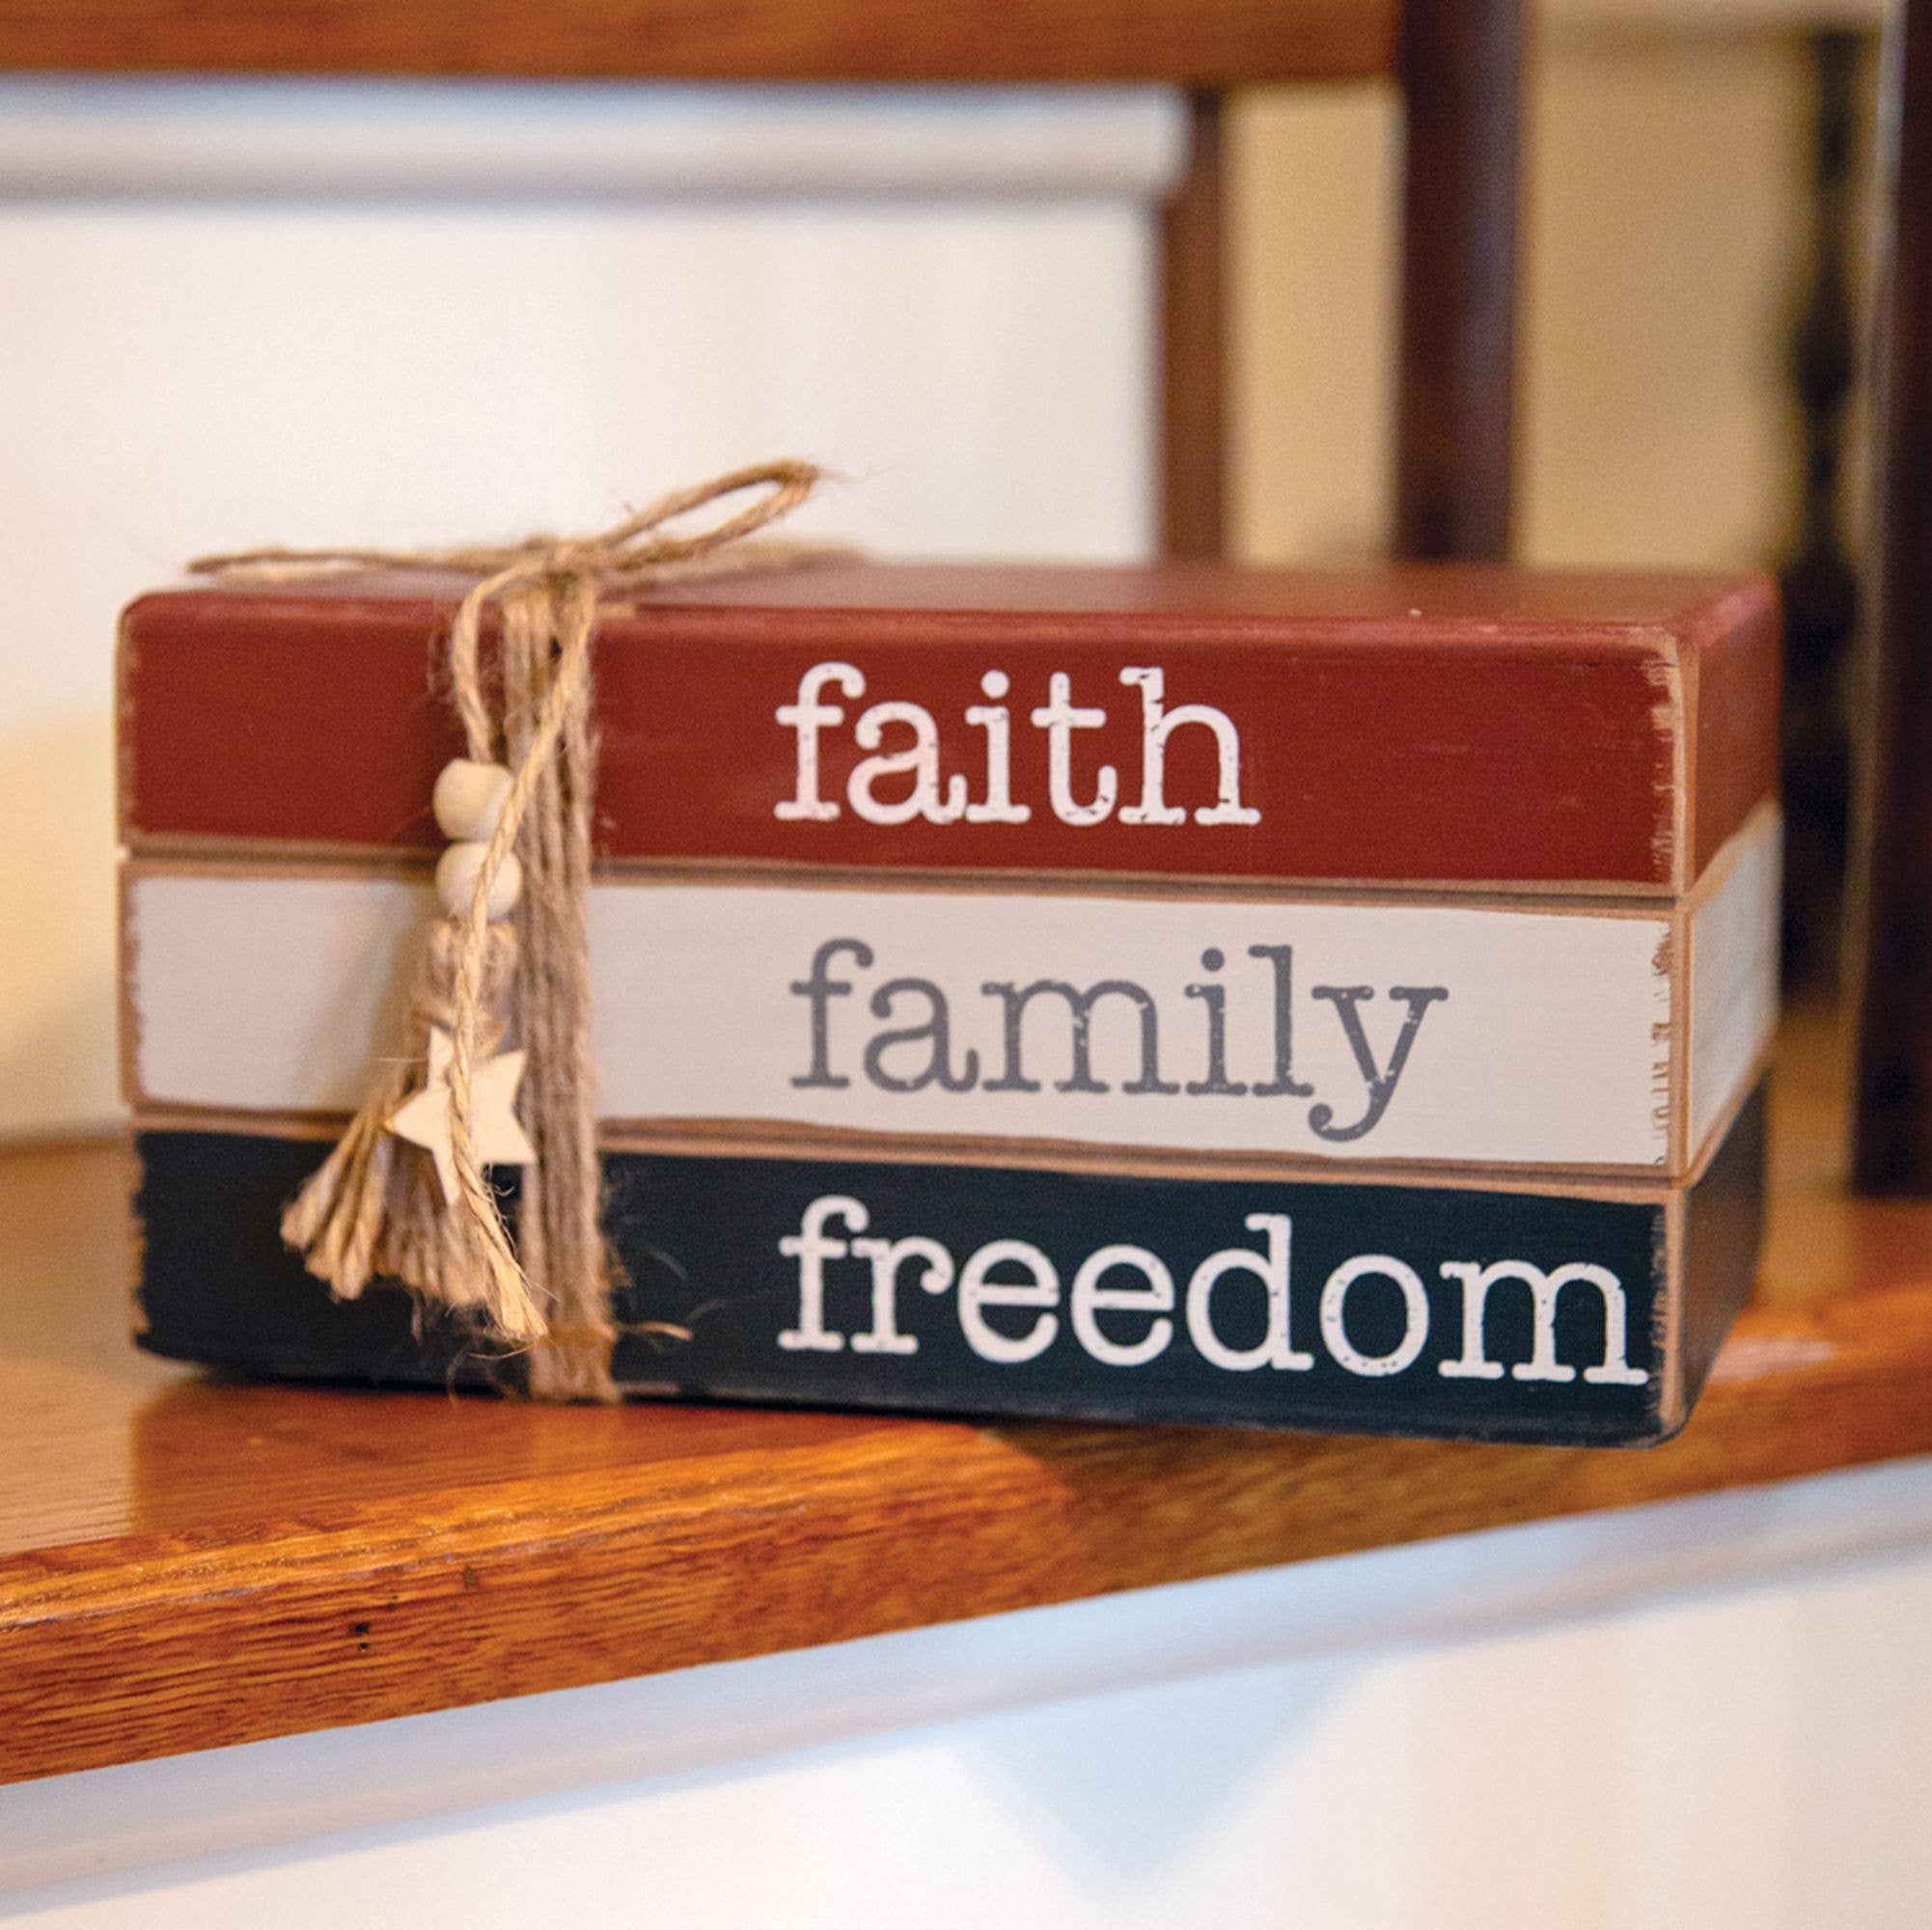 Faith - Family - Freedom Wooden Book Stack